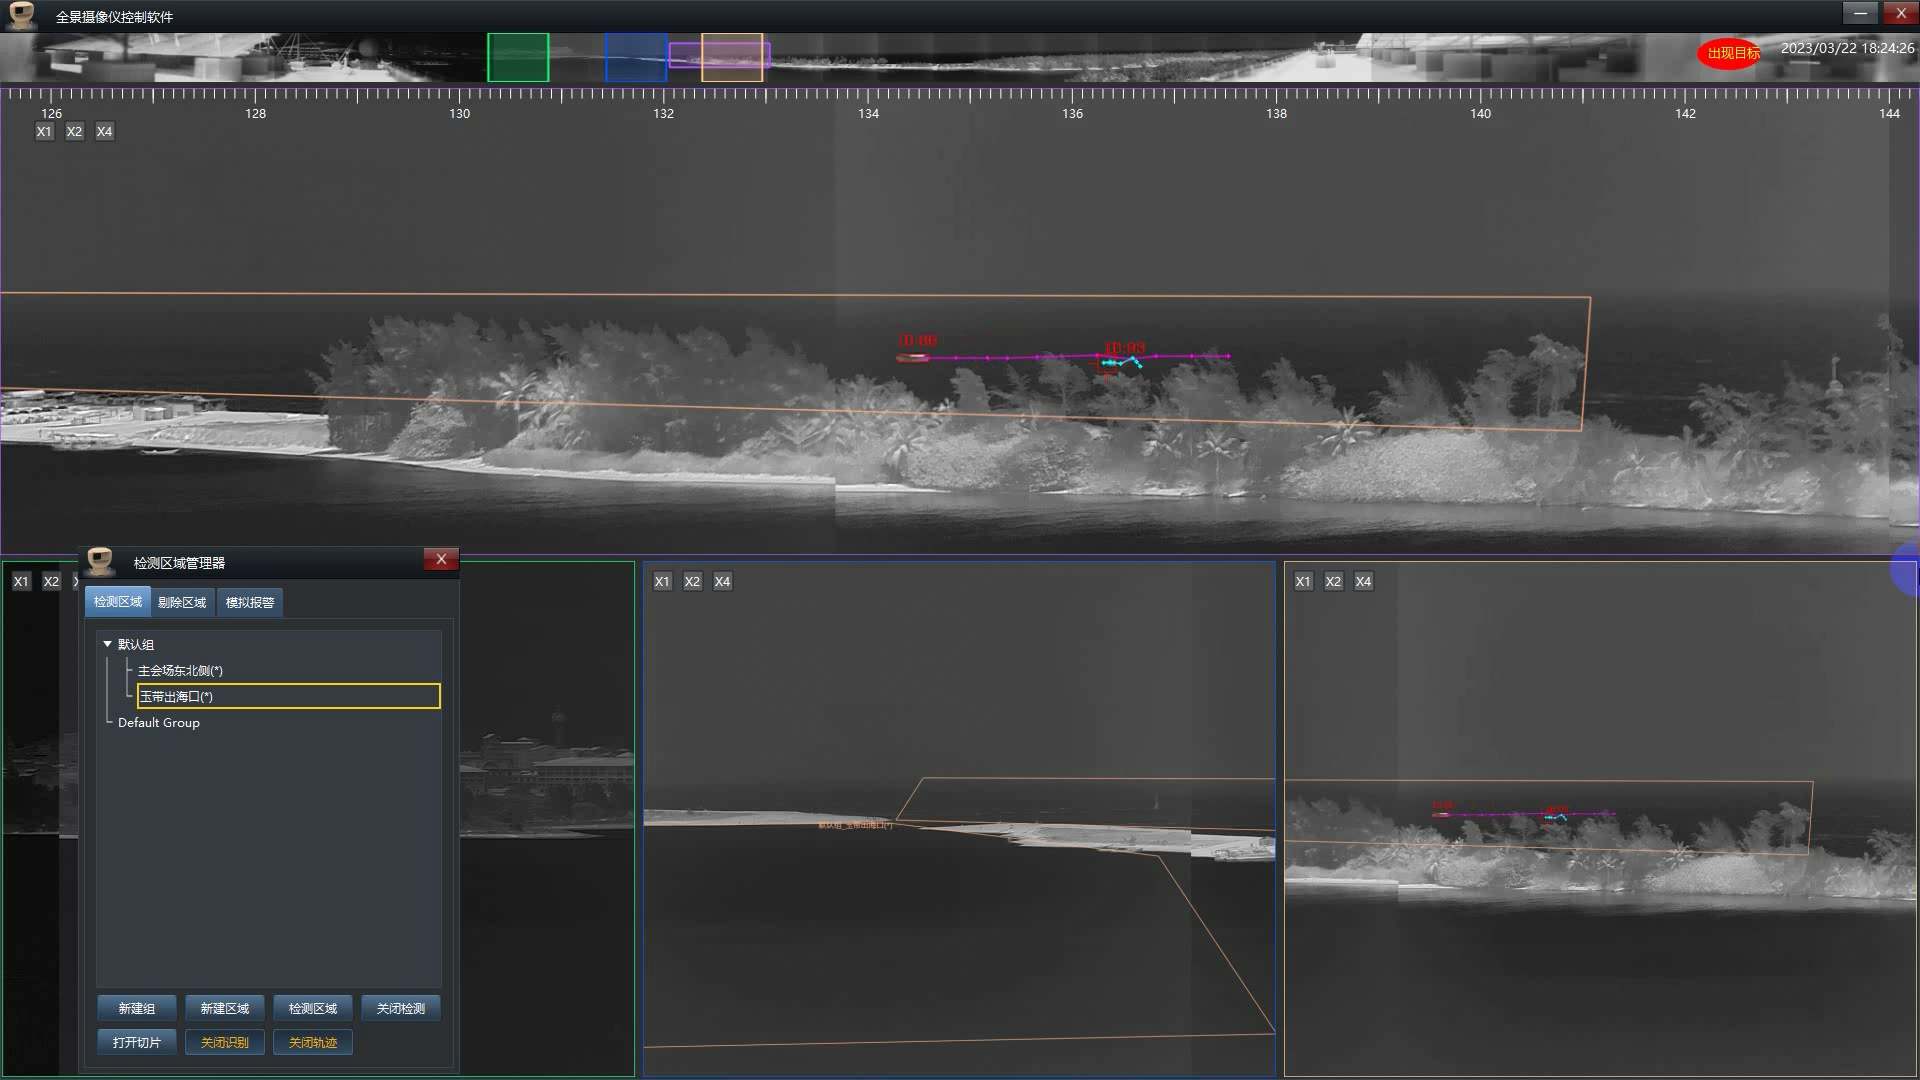 Multi-target_route_tracking_of_infrared_panoramic_camera_(gif).png